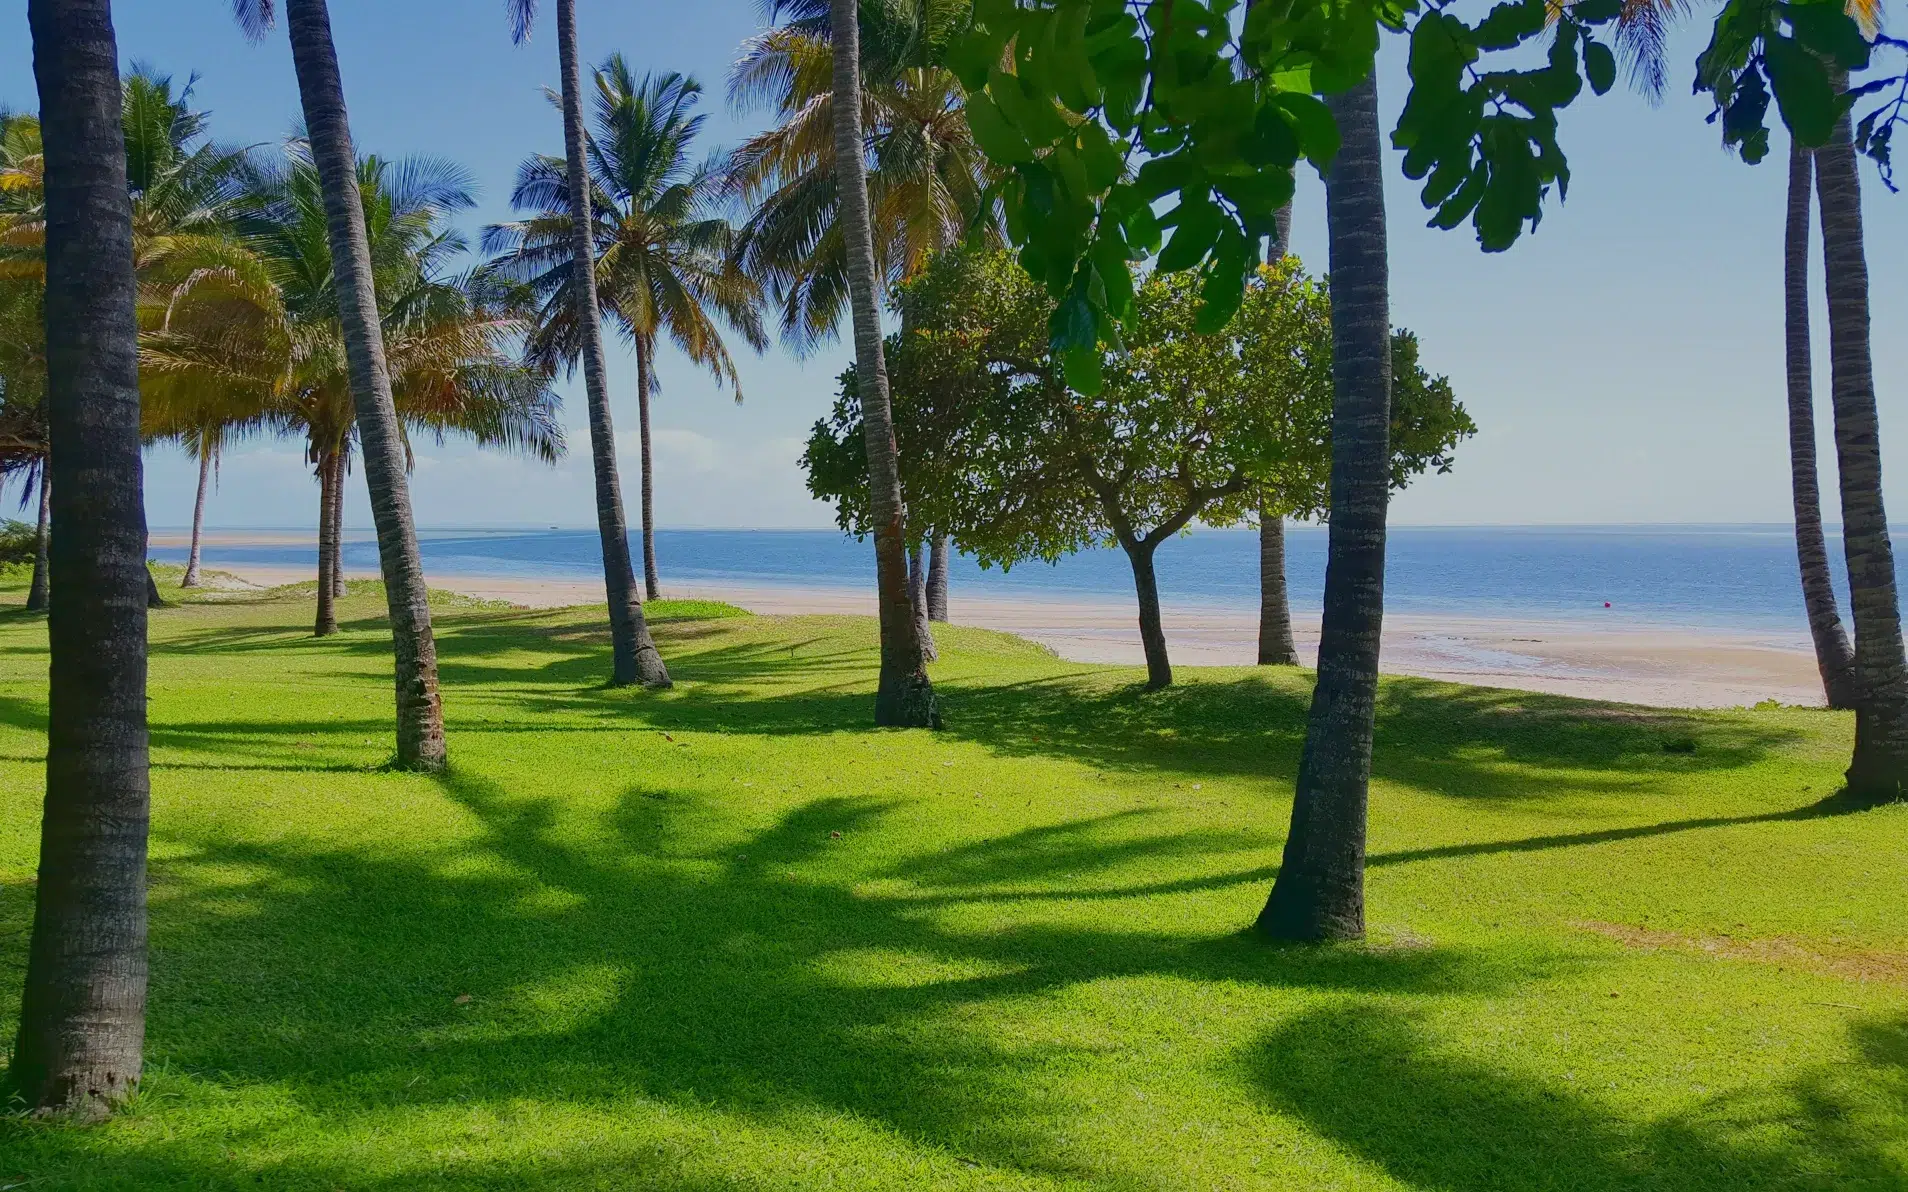 the park with palm trees overlooking the ocean in mozambique